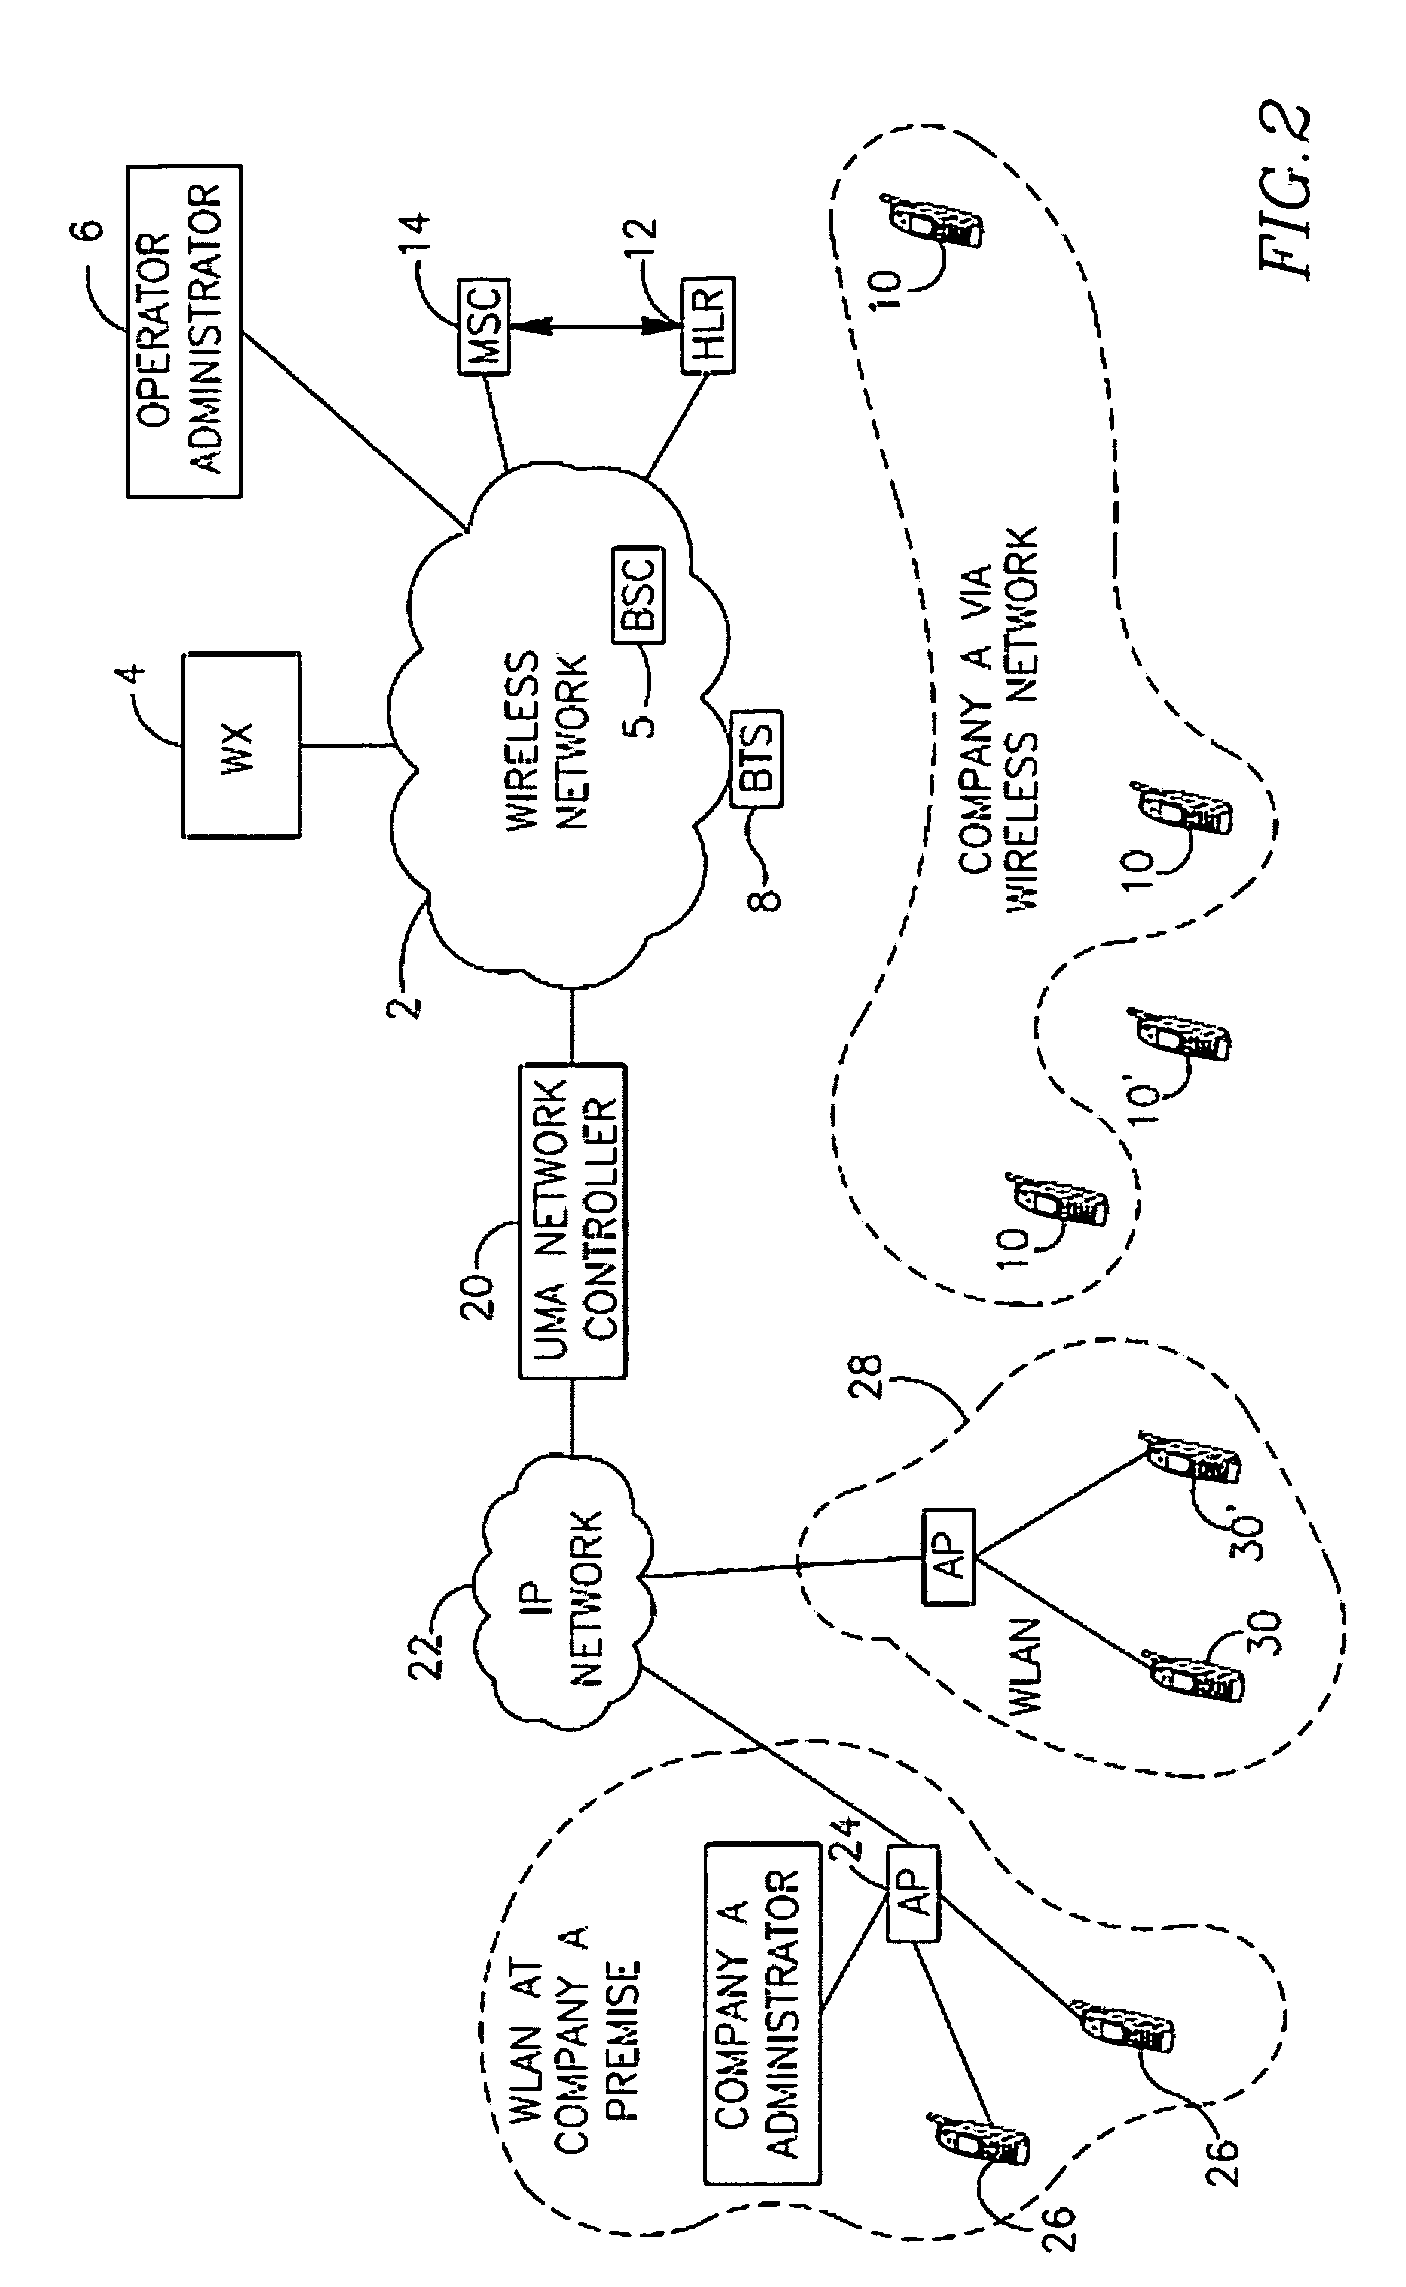 Unstructured Supplementary Service Data Call Control Manager within a Wireless Network